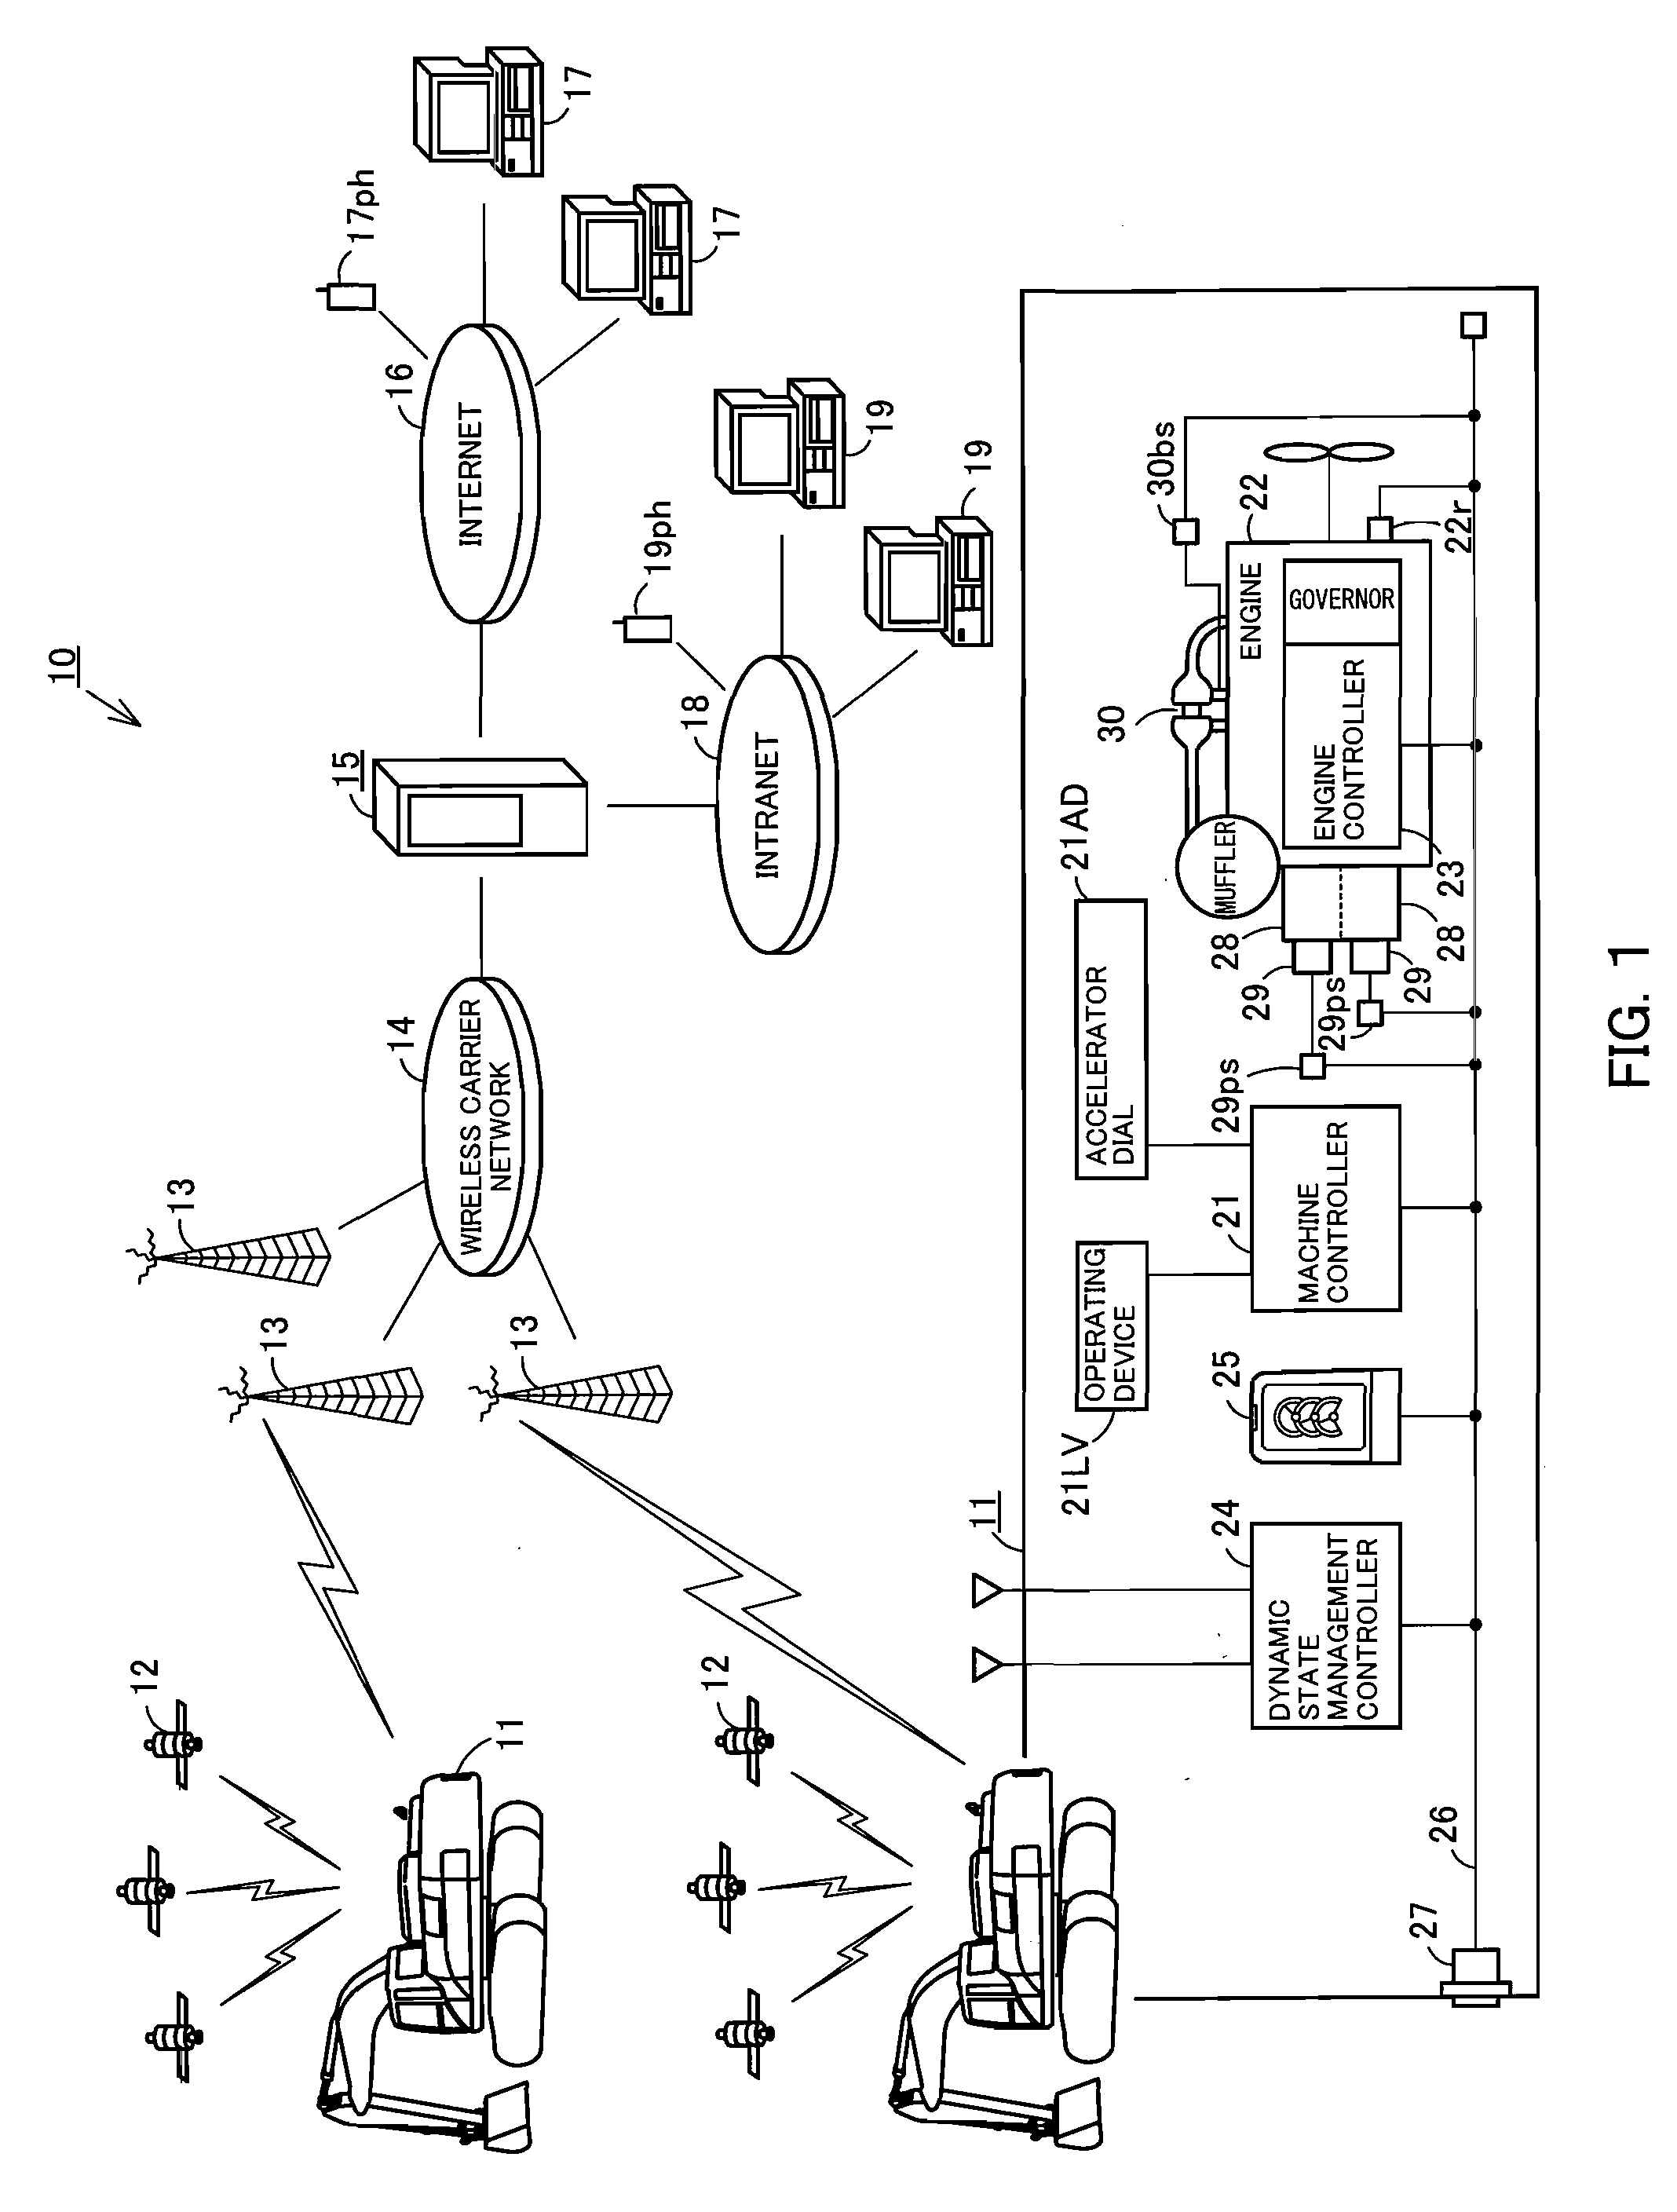 Method and system for diagnosing a machine